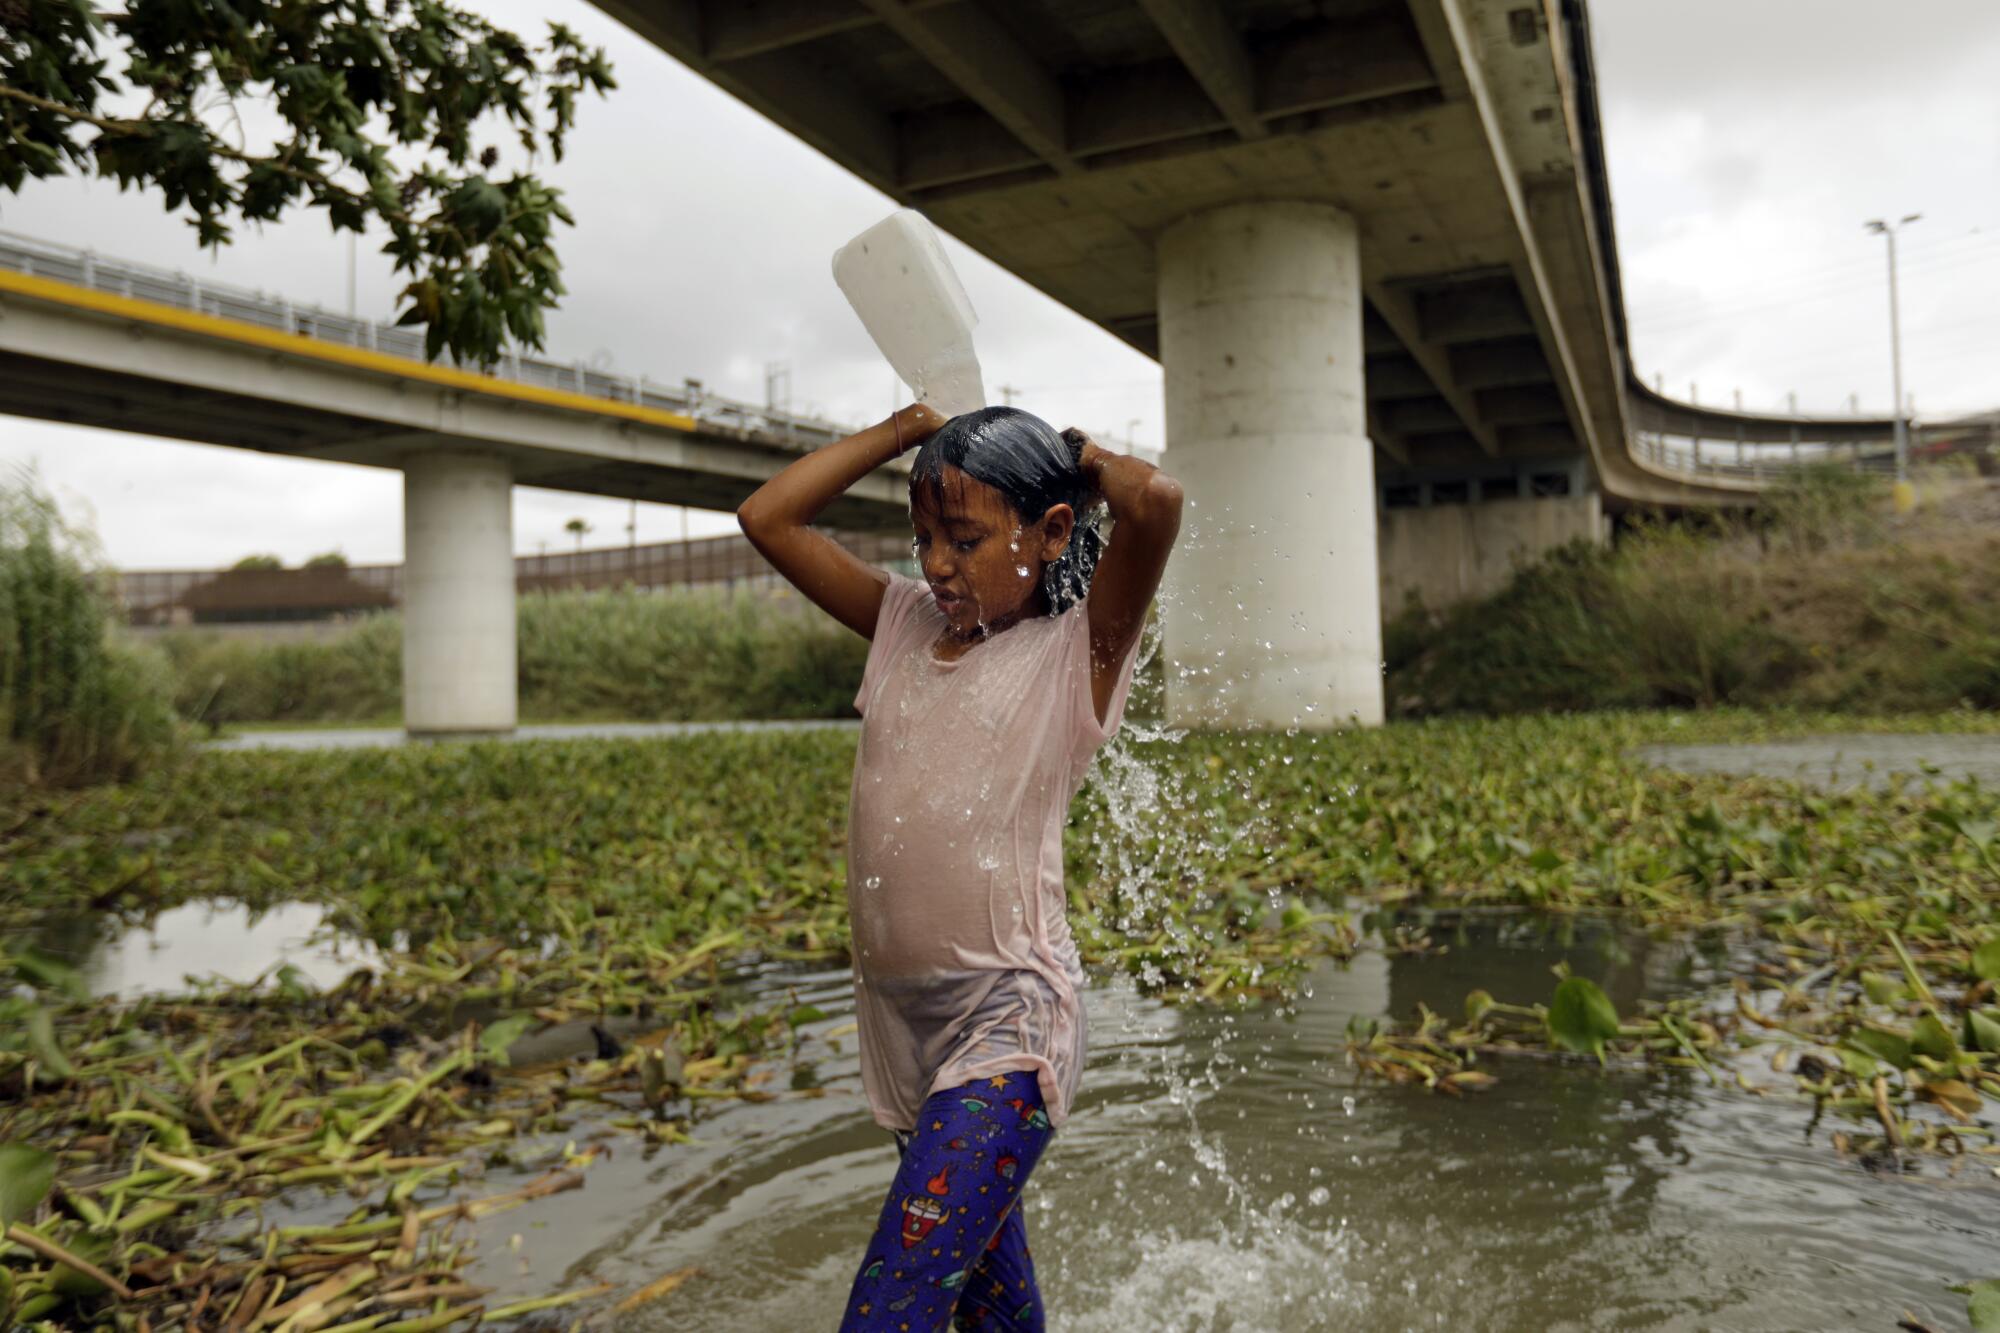 A migrant girl washes her hair.